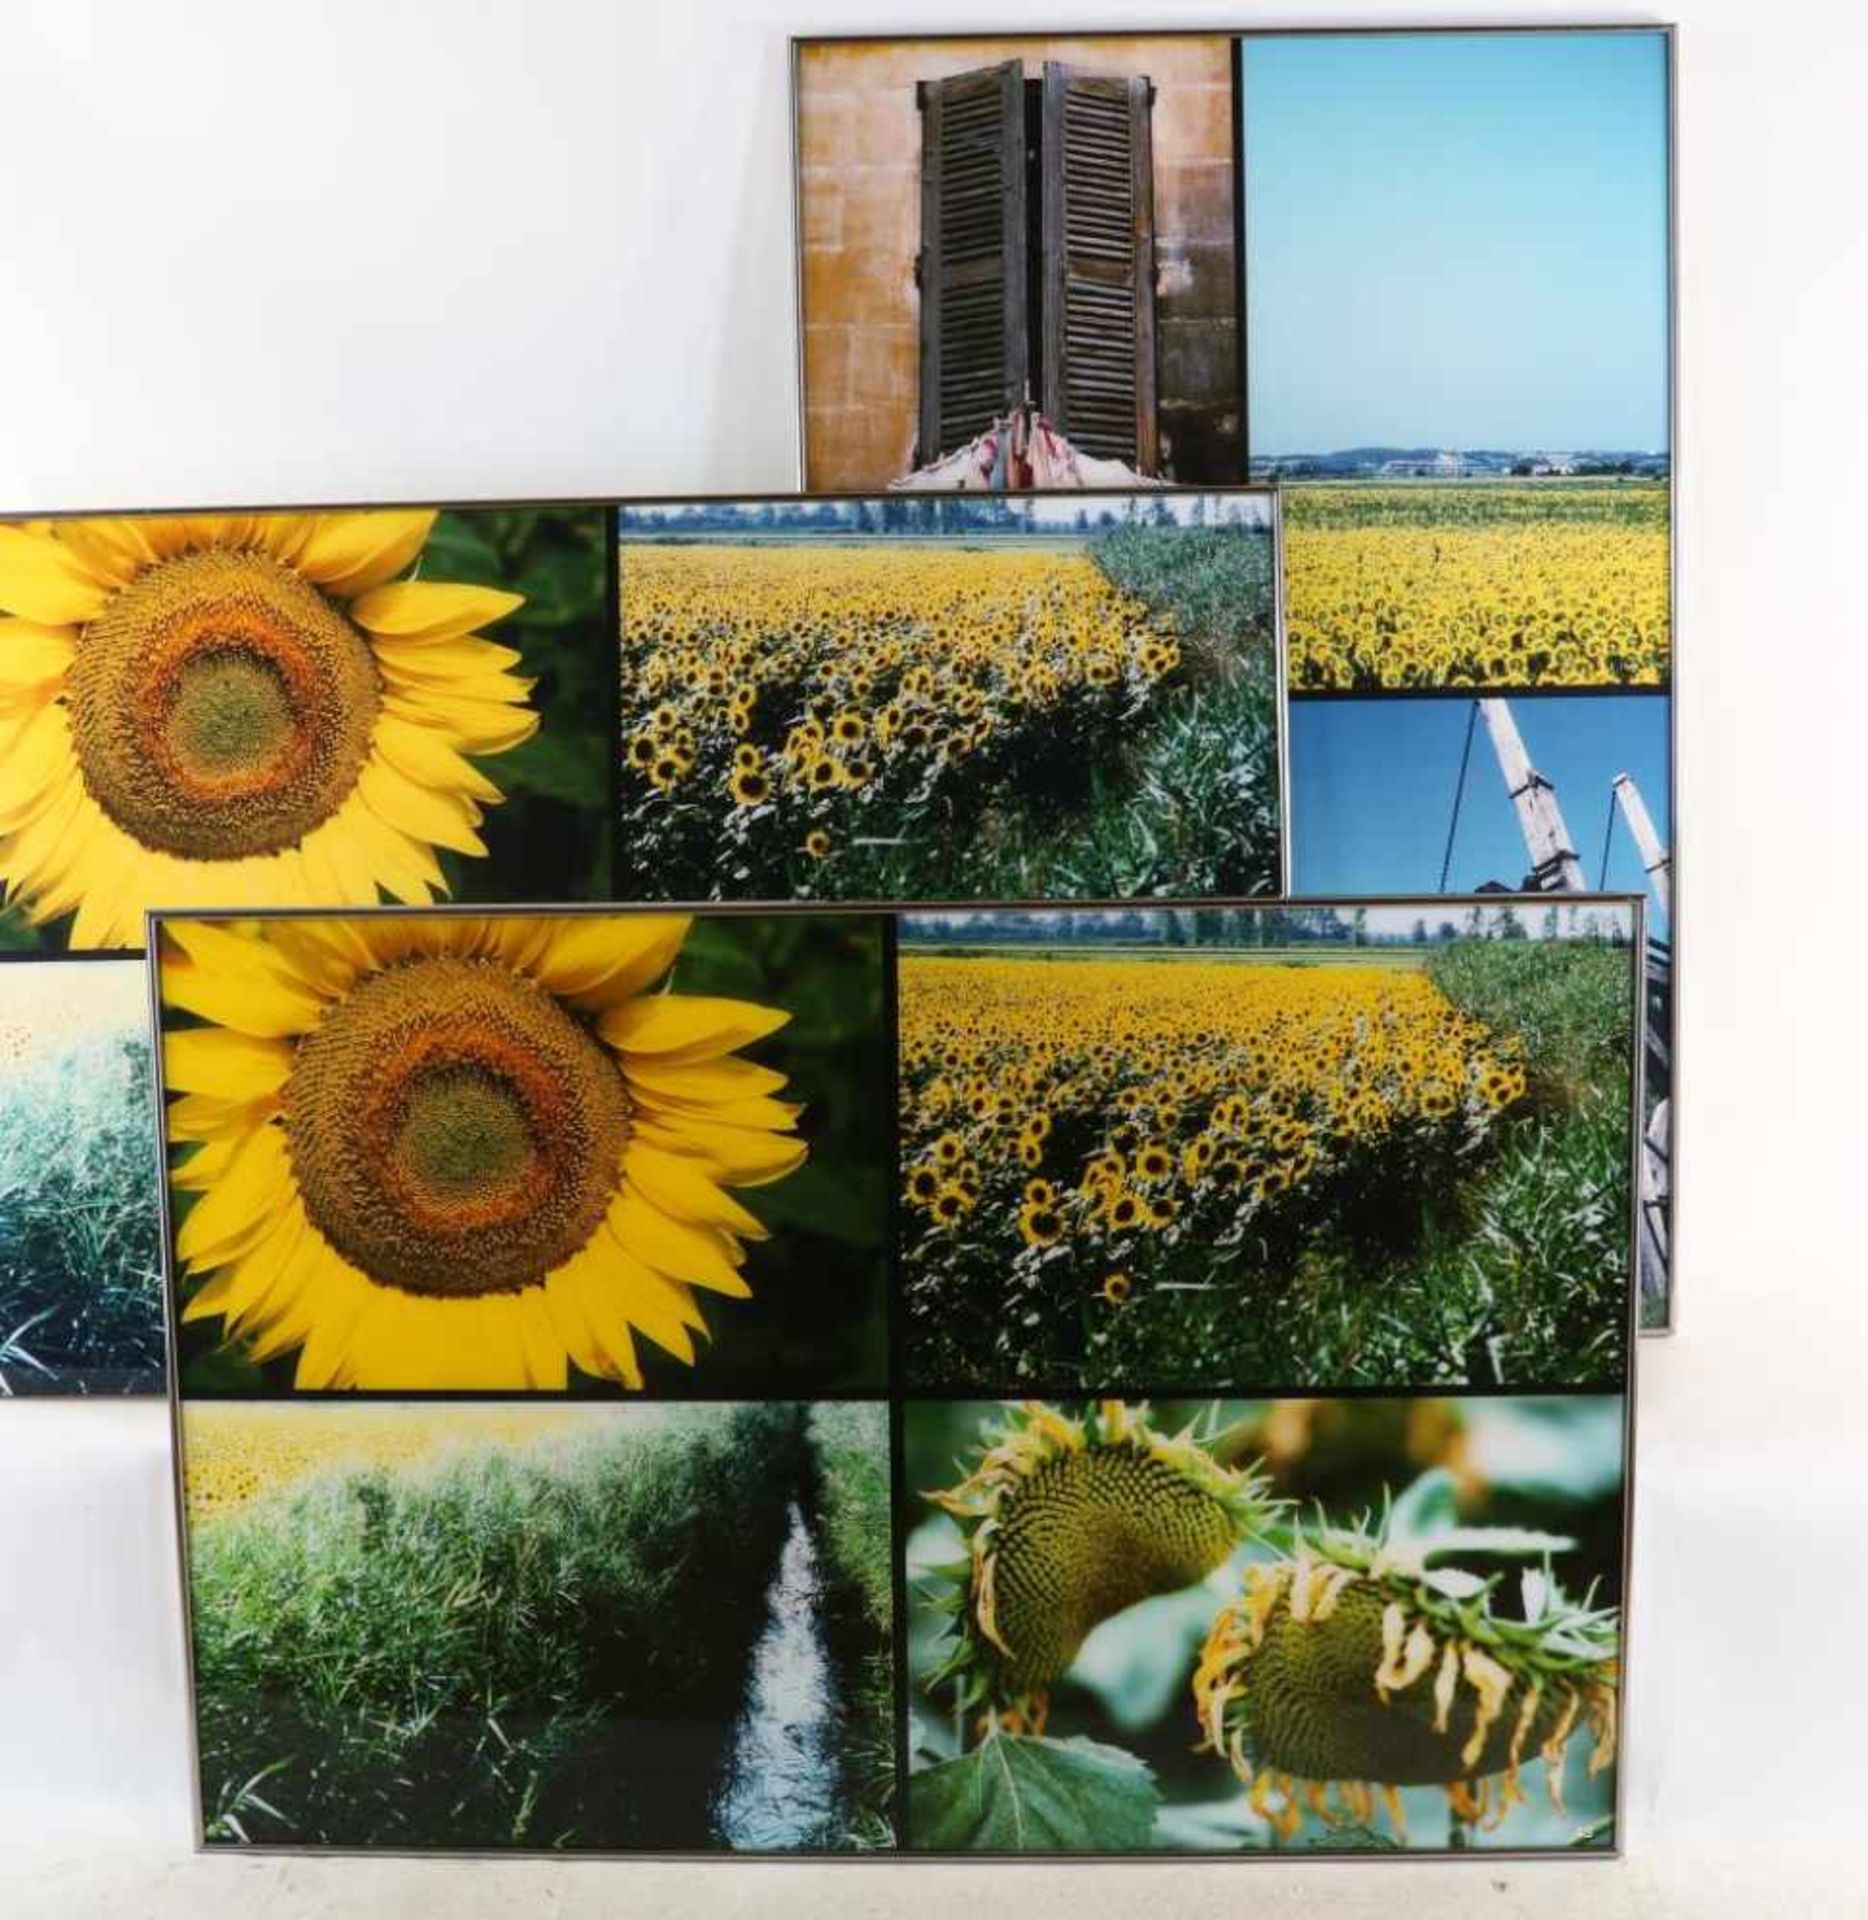 Huf, Paul (1924-2002), Sunflowers, South of France, 3 compilations of photographs 120 x 80 cm.